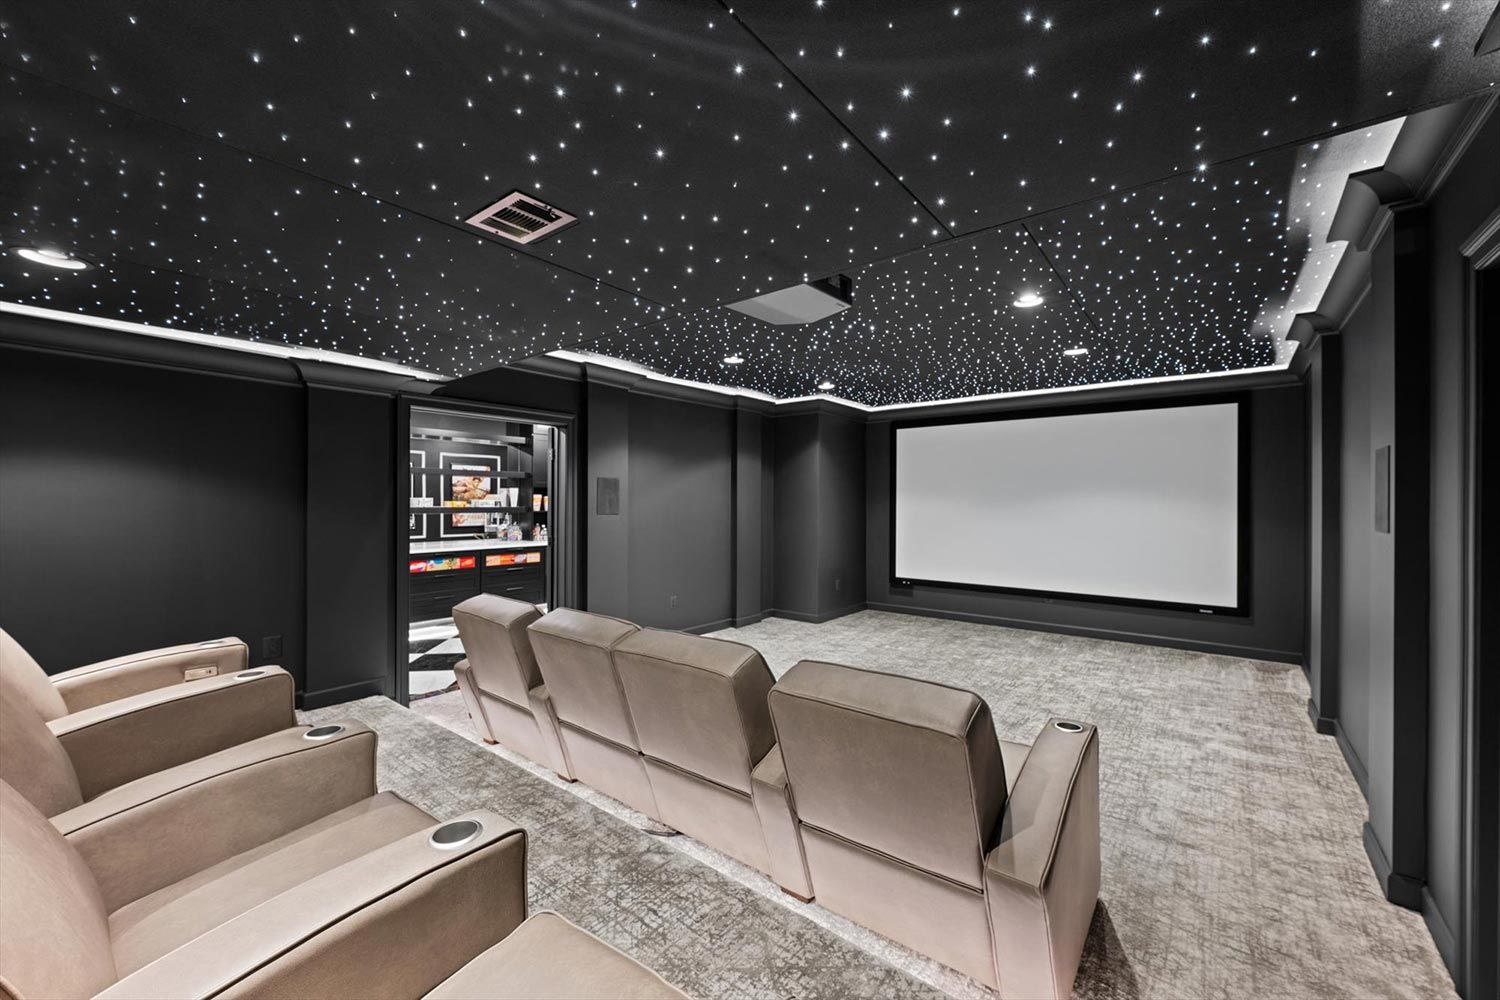 Elegant home theater room with multiple rows of seating and a view into a concession area, all under a starry ceiling, blending comfort and convenience.